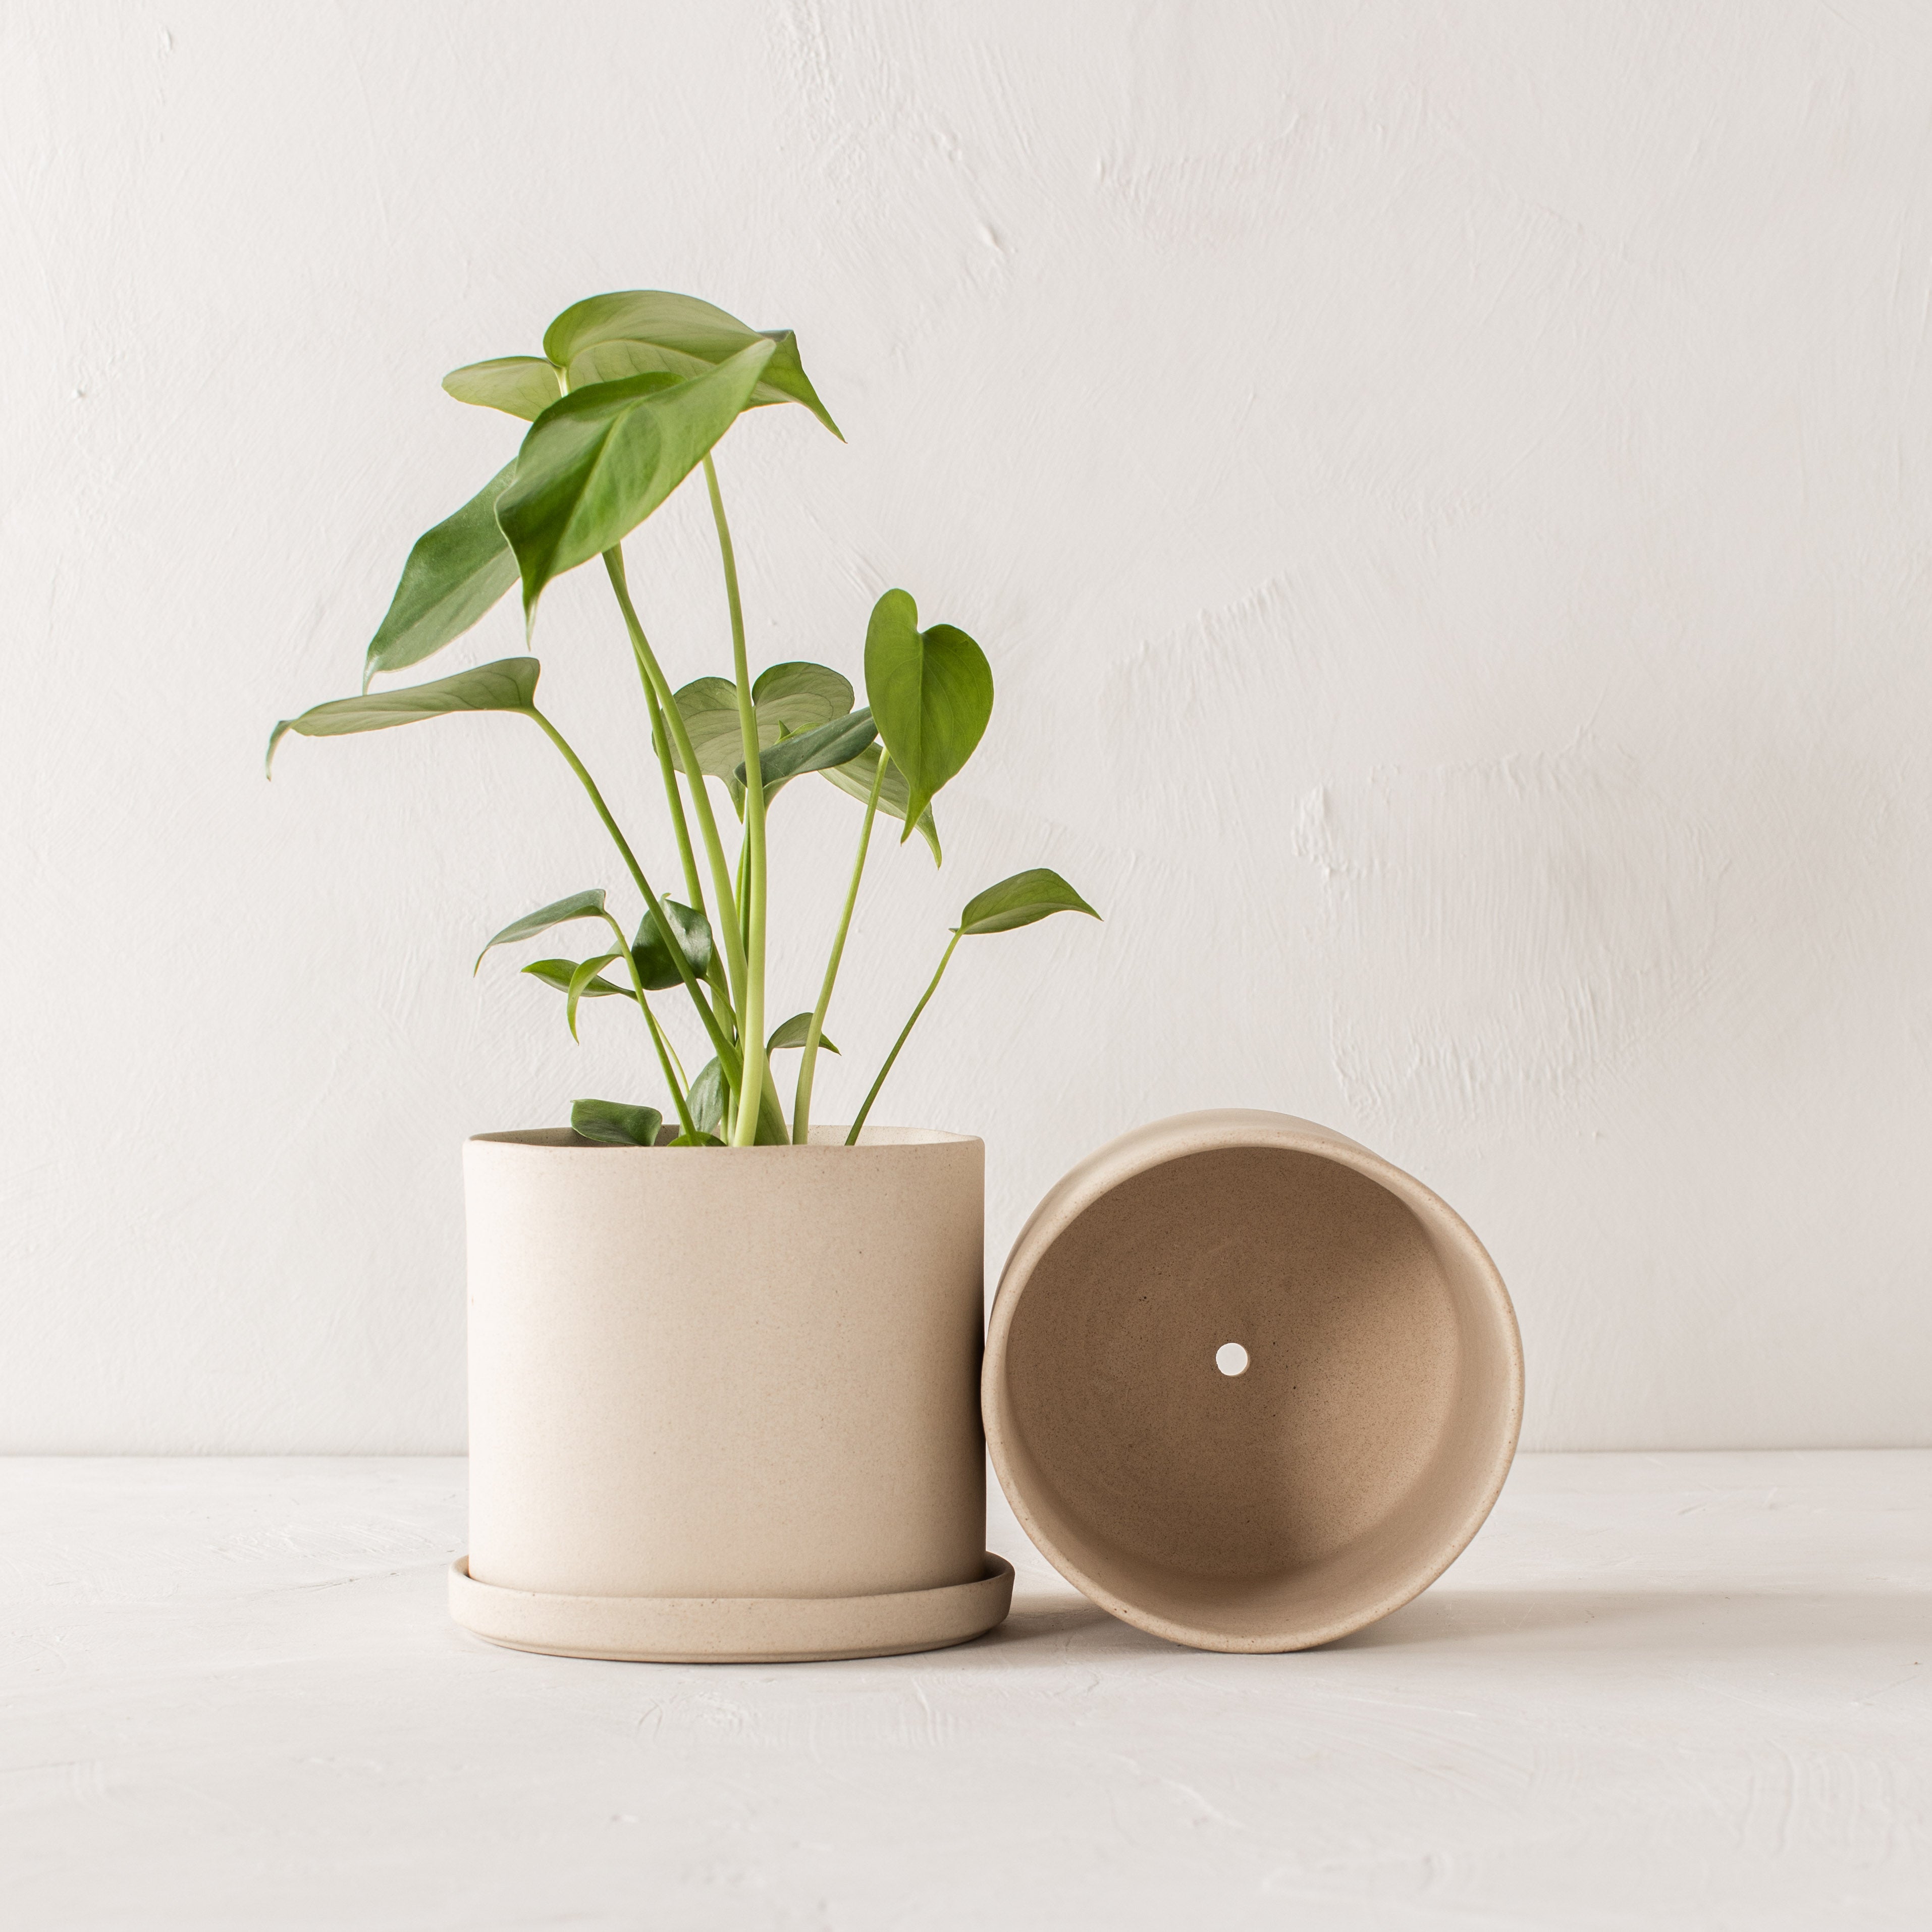 Pair of stoneware planters side by side, one with a drainage dish the other lay on its side shows its drainage hole. Upright planter has a 6 inch monstera inside. Handmade ceramic planters designed by Convivial production sold by Shop Verdant, Kansas City, Mo plant store.